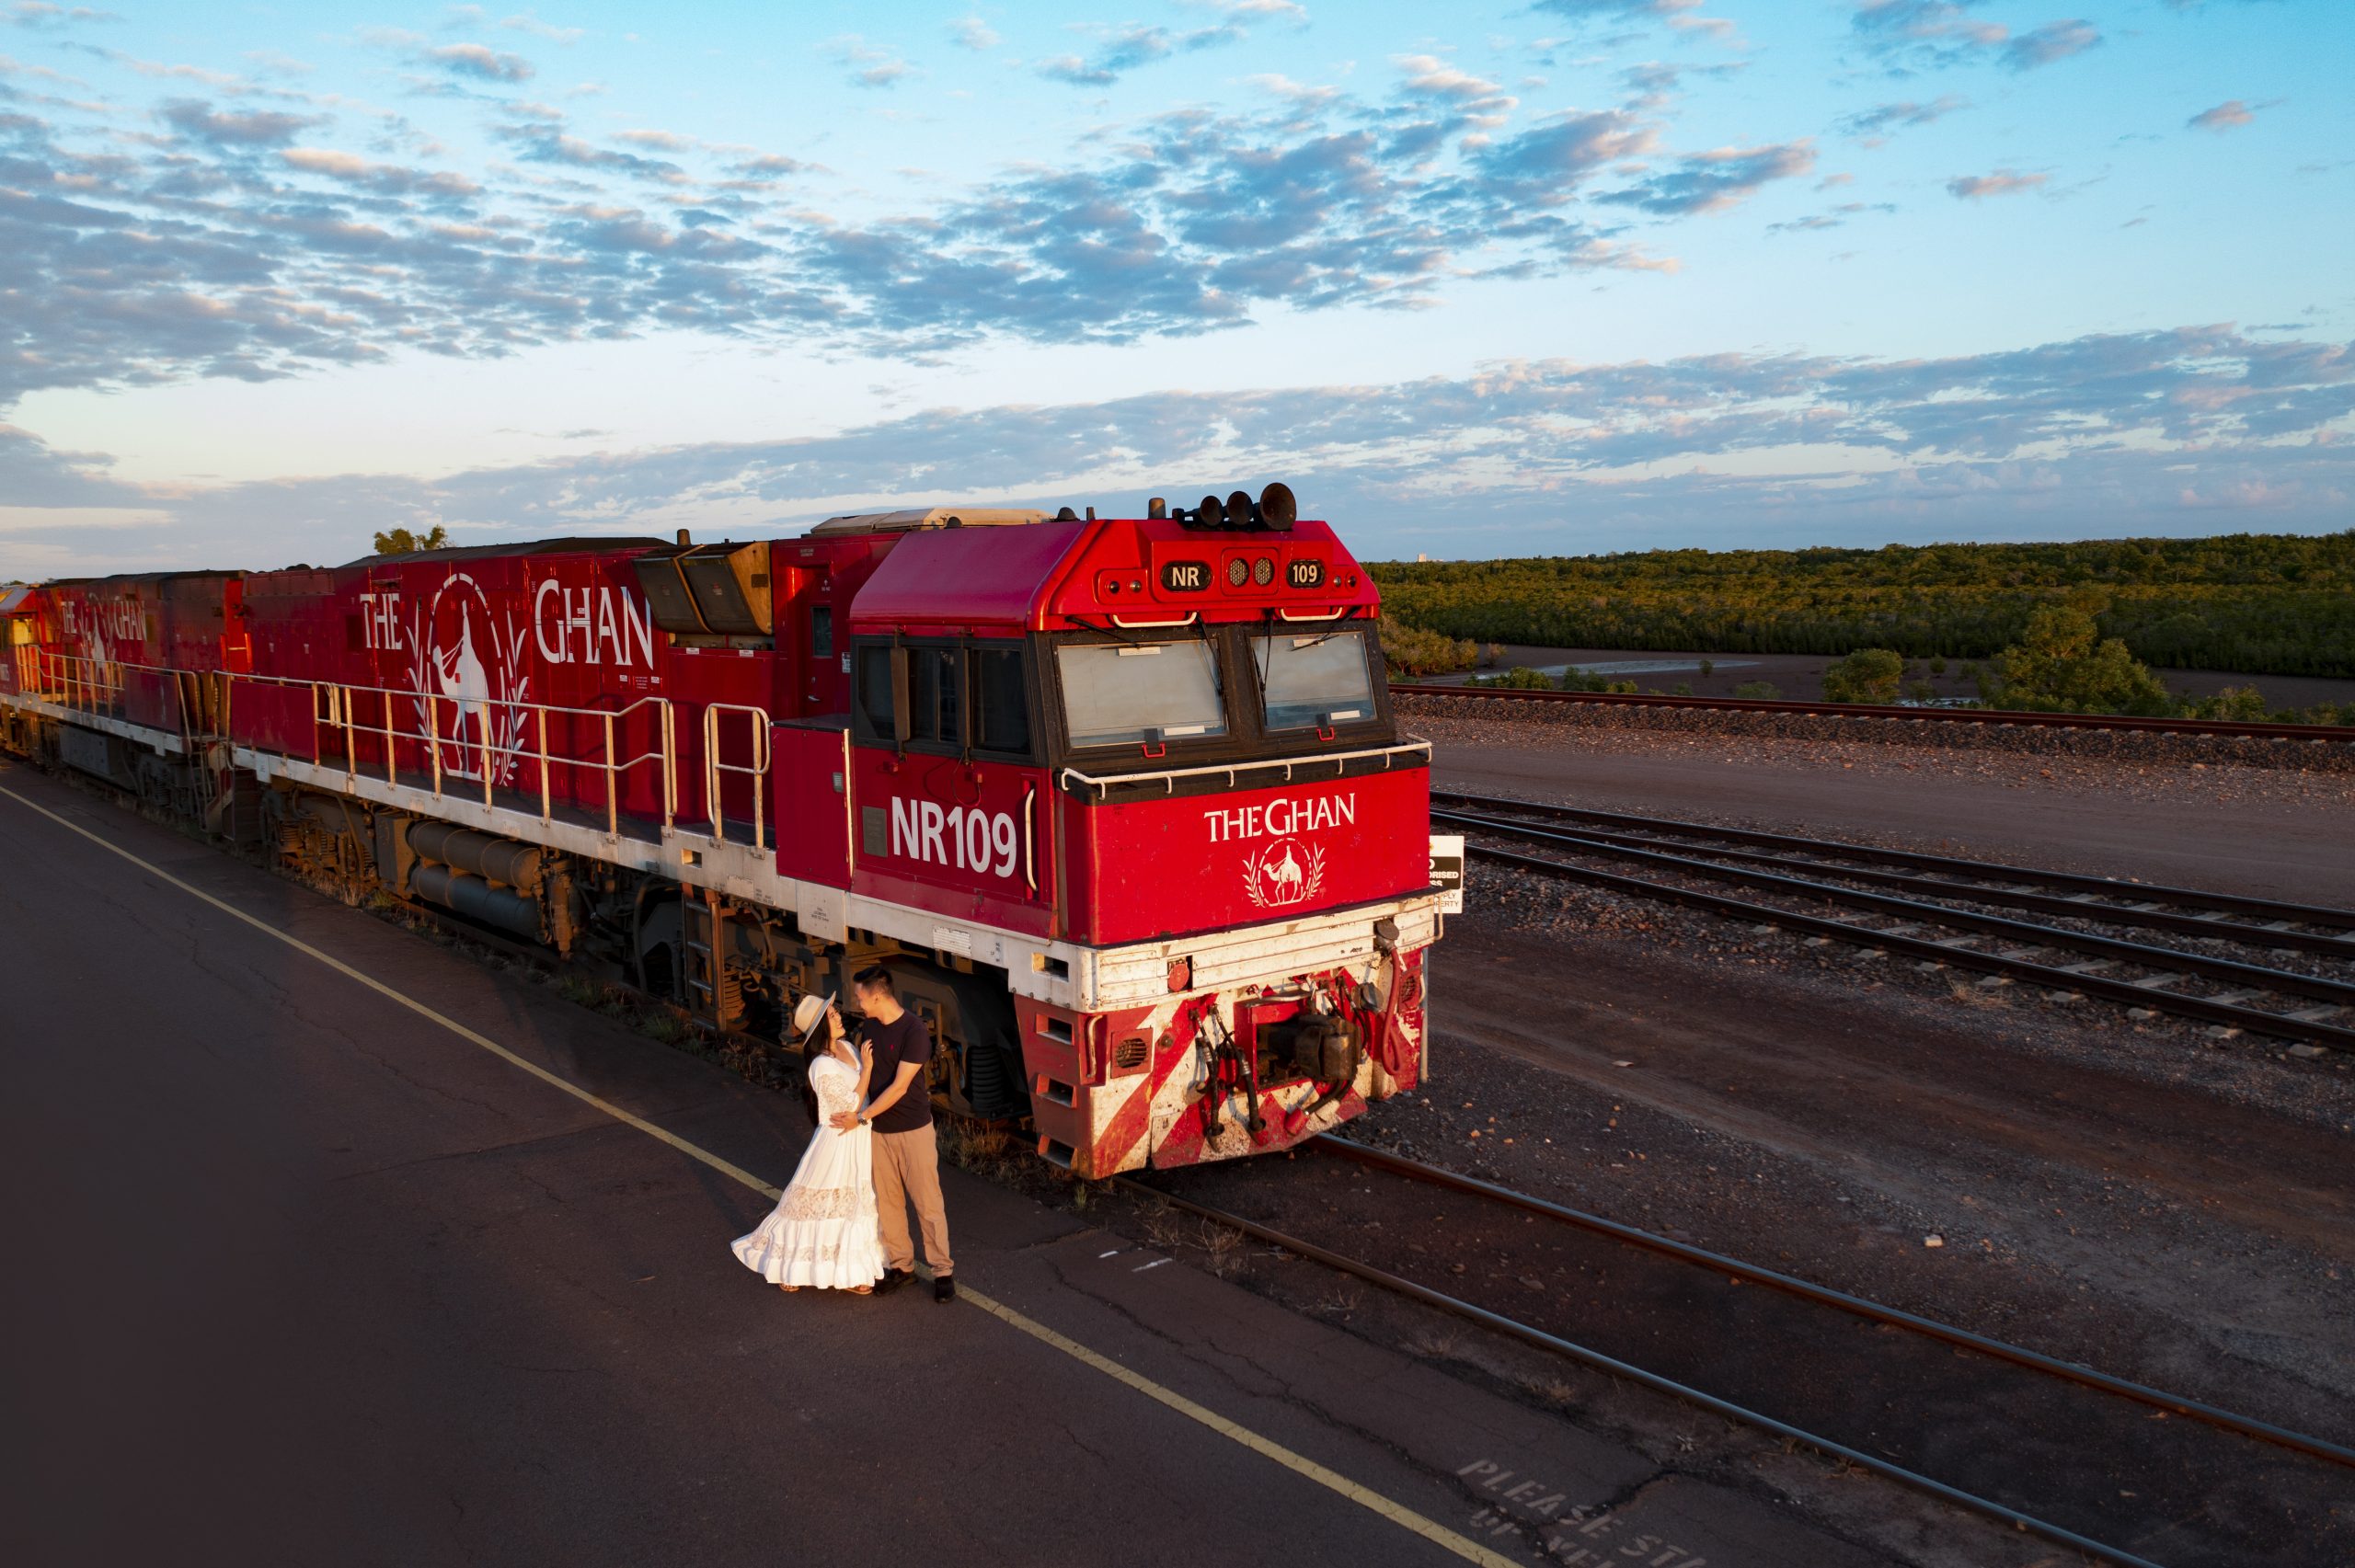 Couple on a platform in front of the Ghan